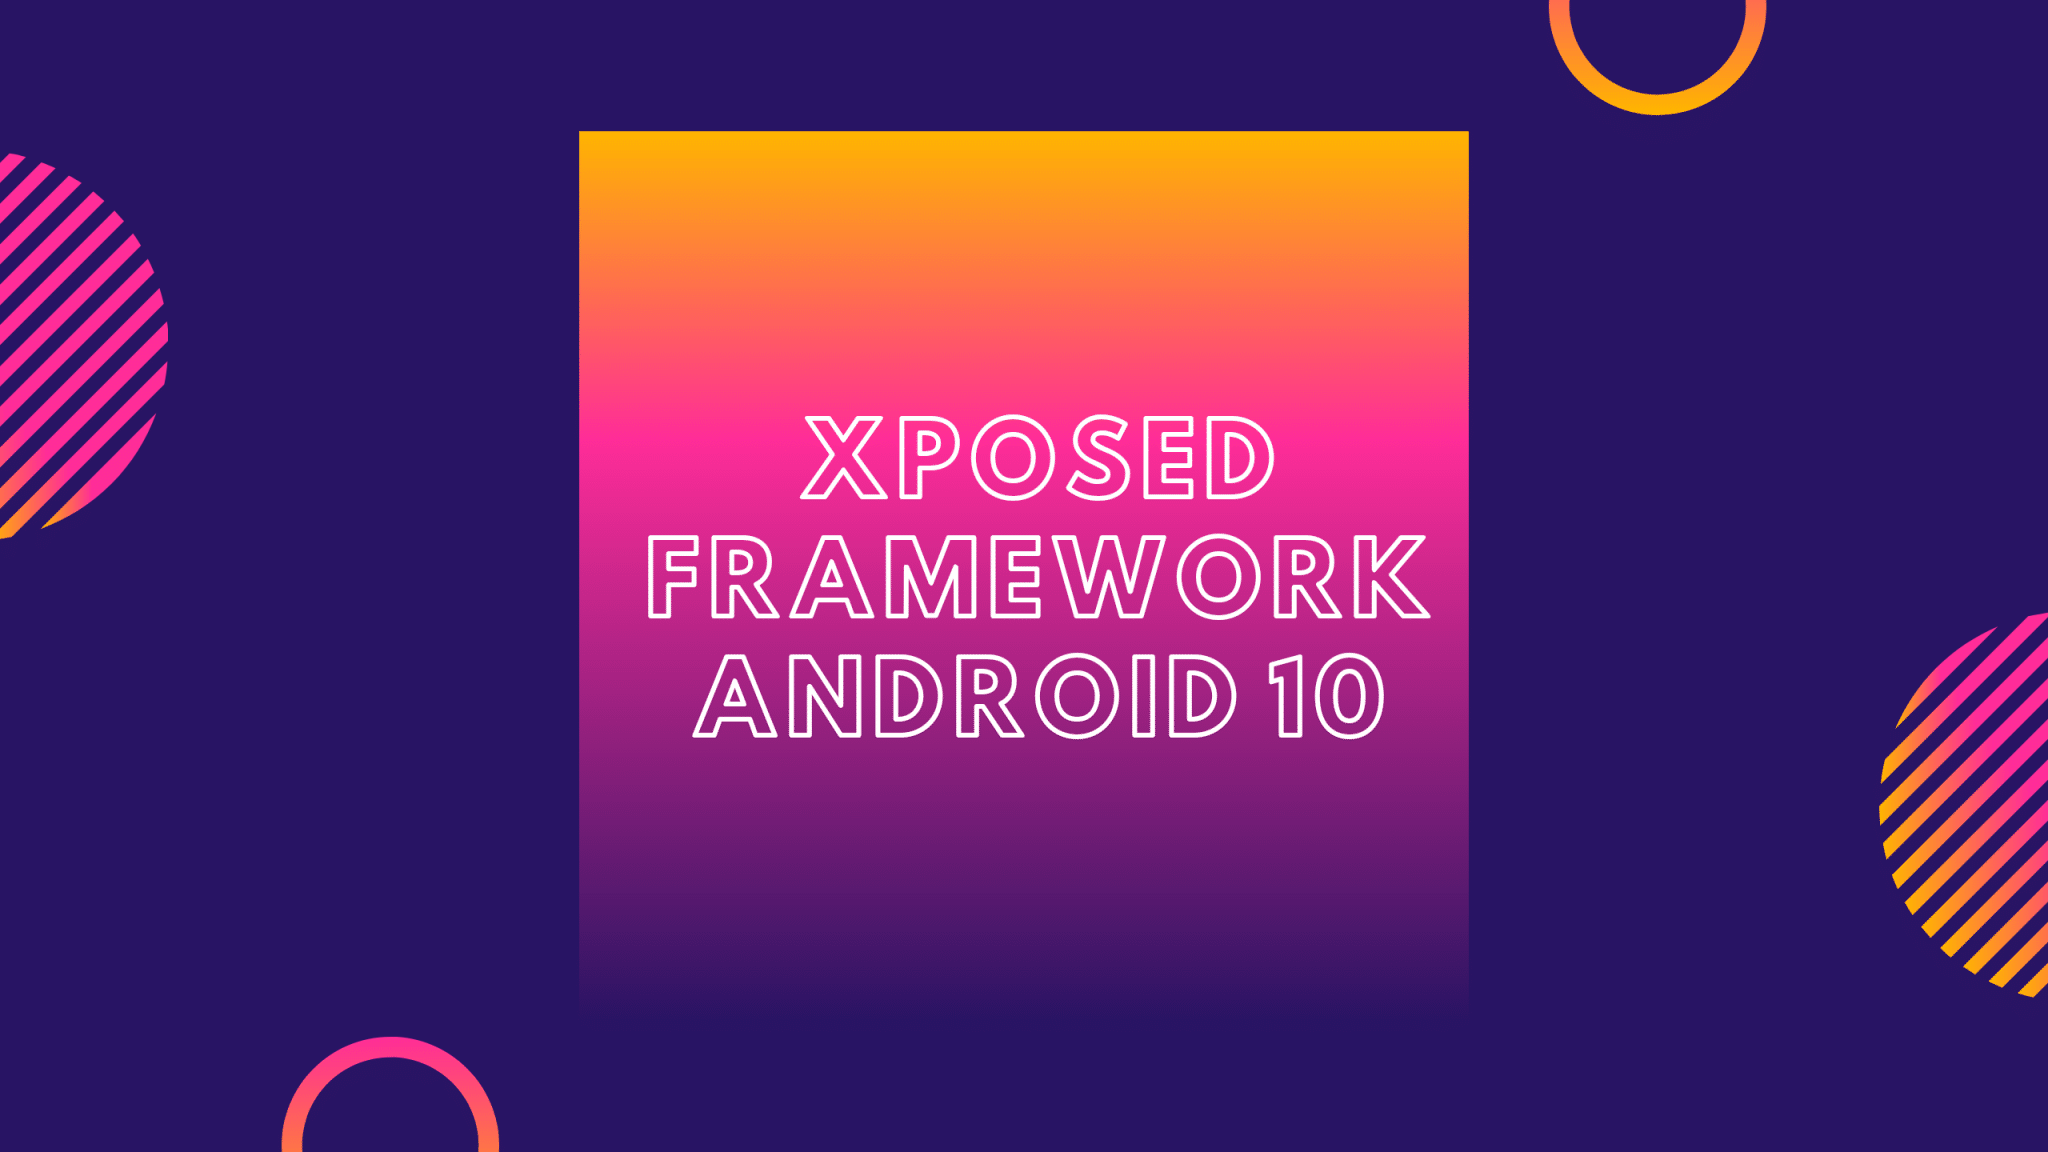 Install Xposed Framework on Android 10 {EdXposed}